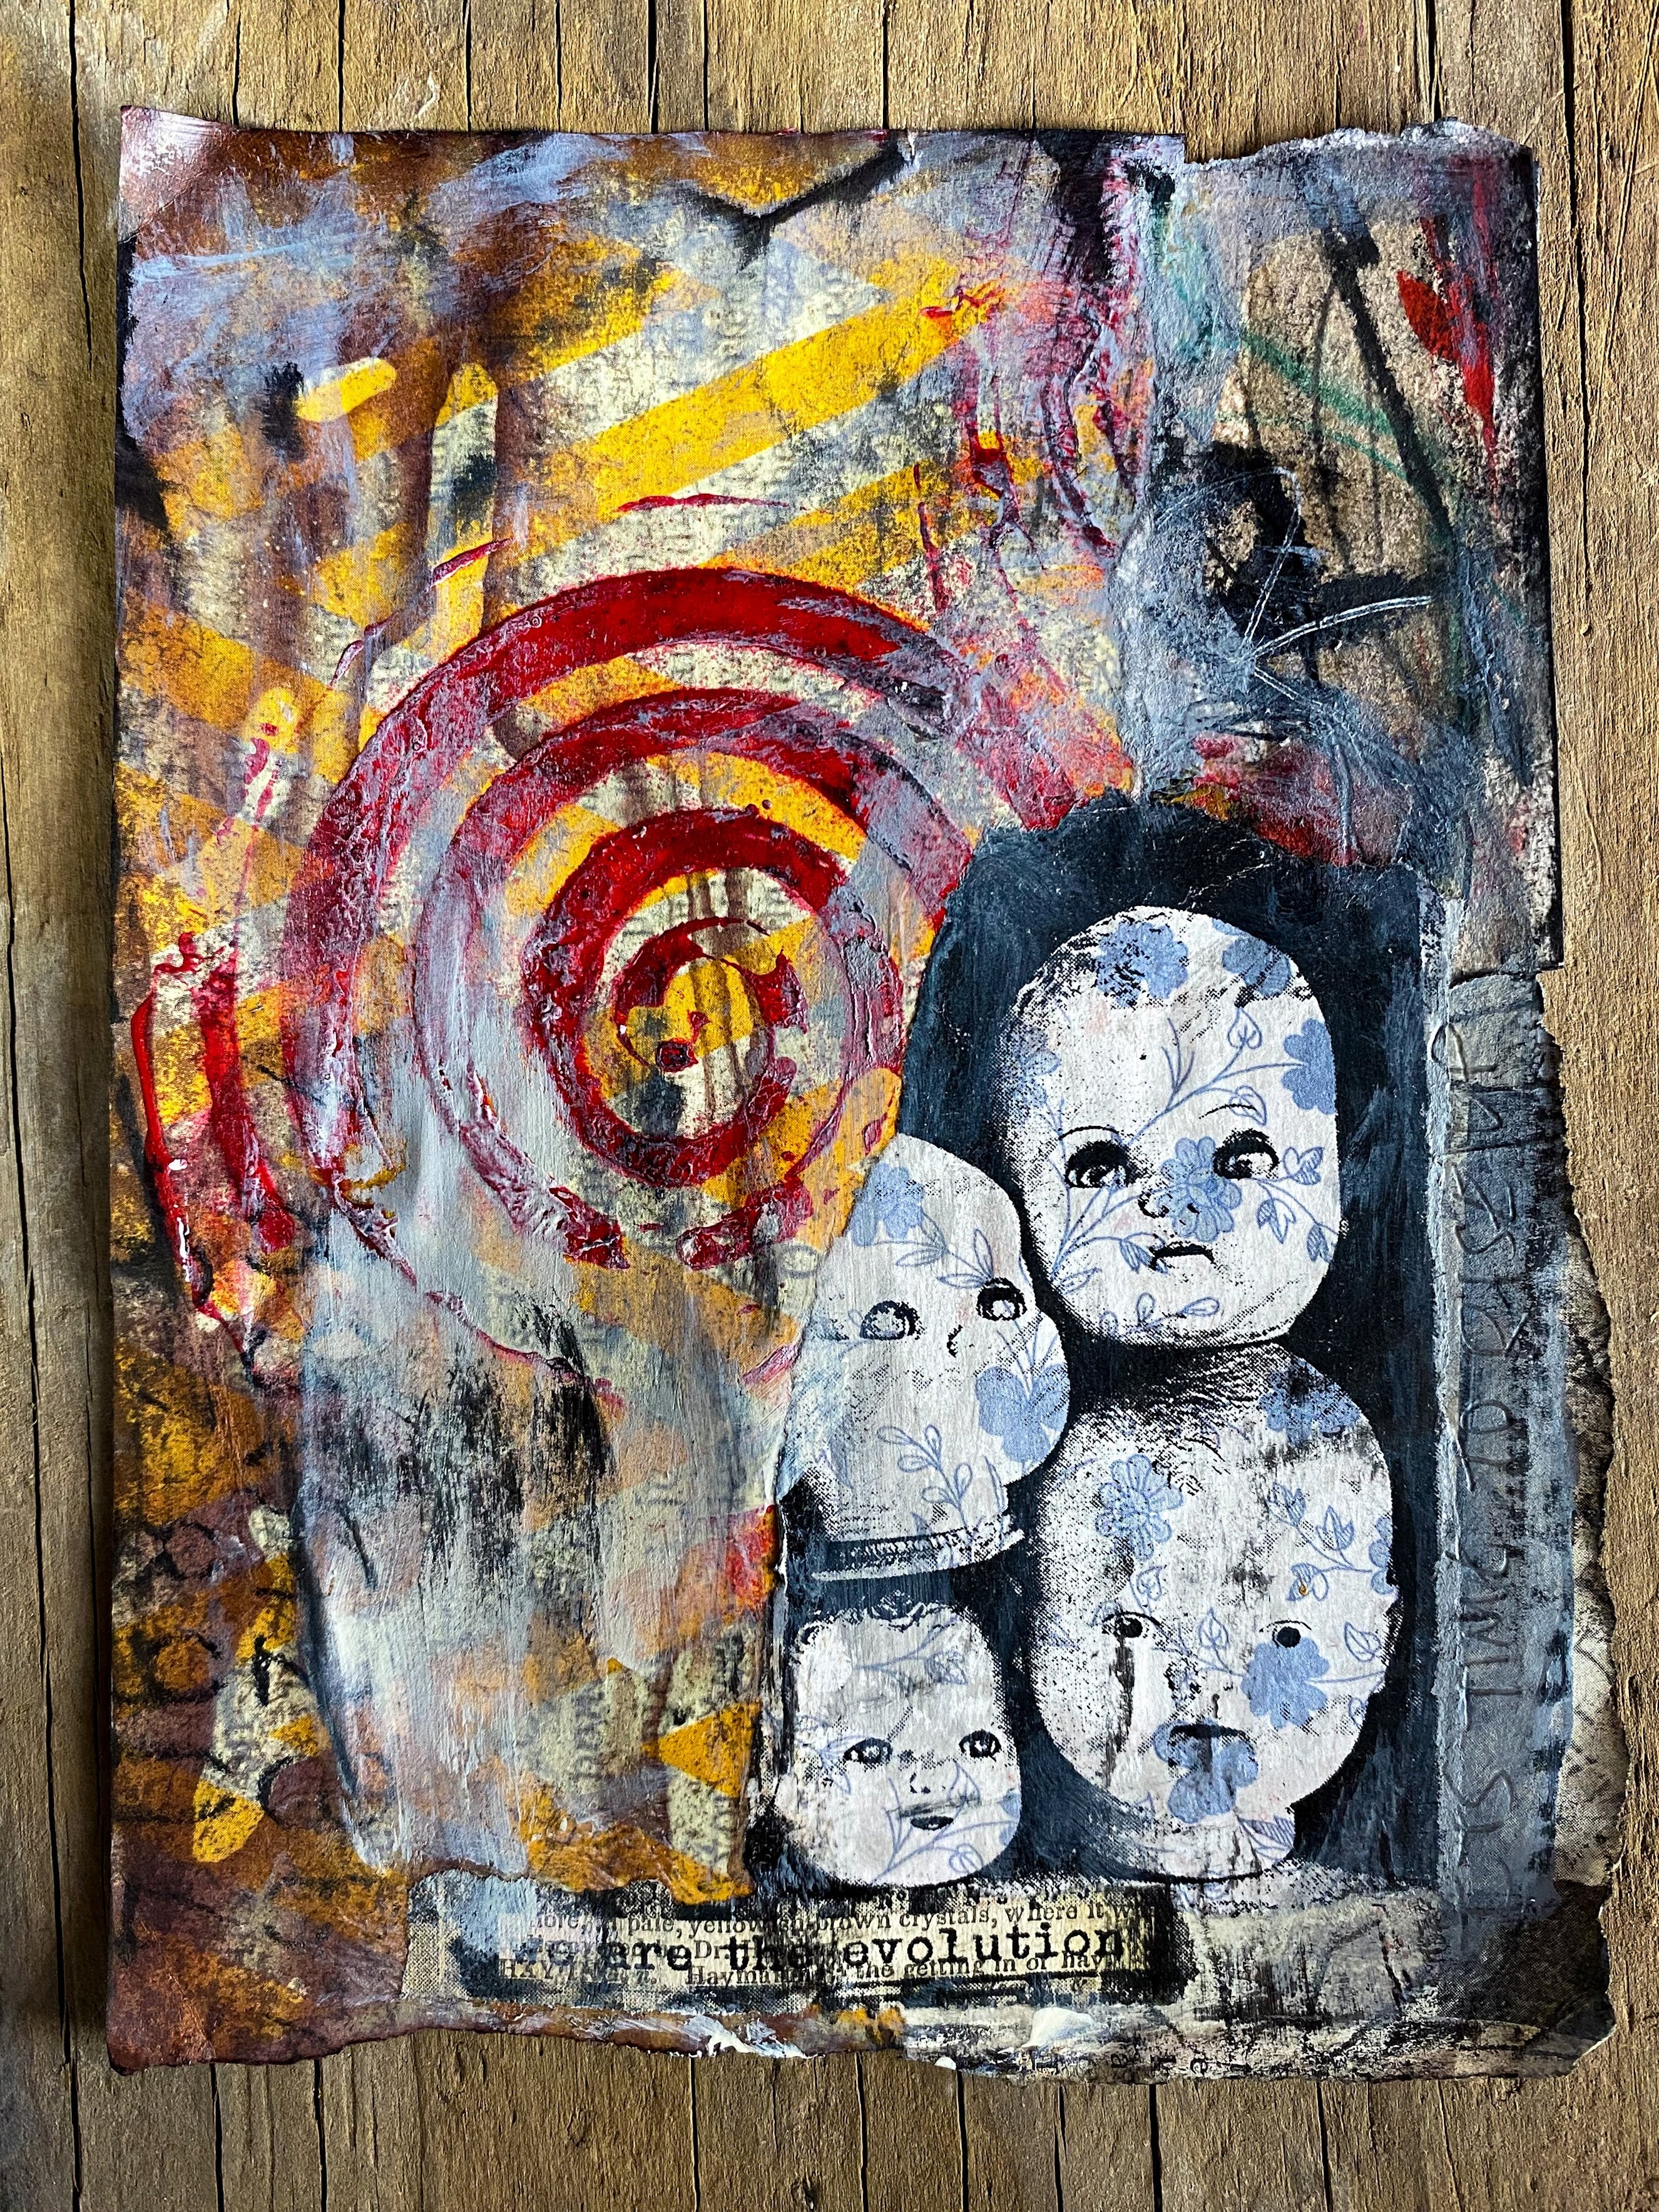 We Are the Revolution - Original Mixed Media Collage